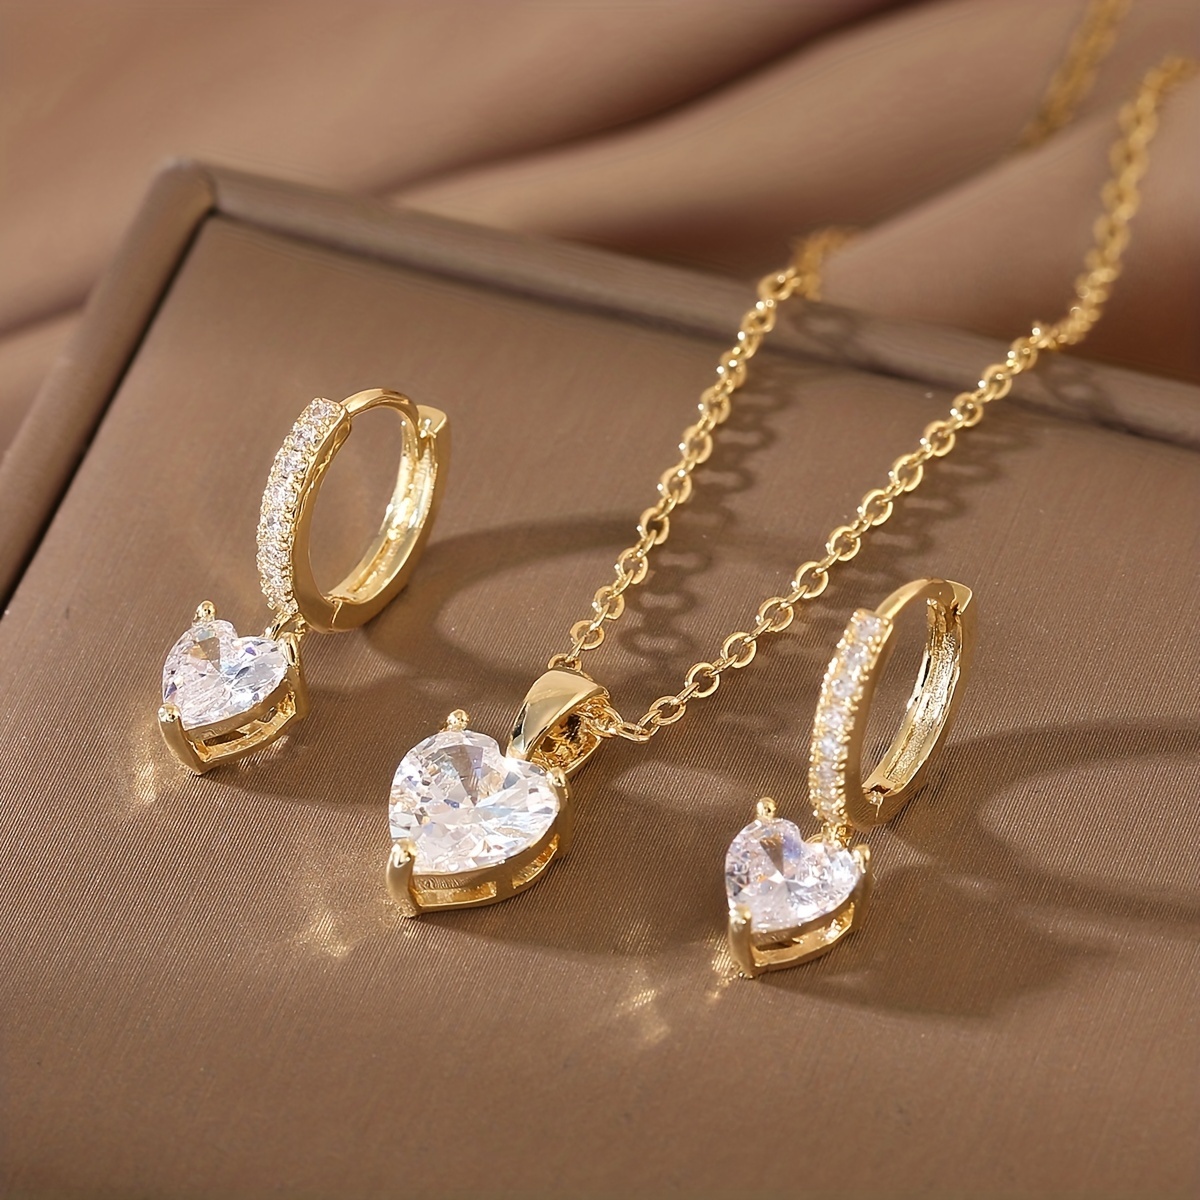 

3pcs Earring Plus Necklace Luxury Jewelry Set 14k Plated Inlaid Shining Zircon Sweet Heart Shape Match Evening Party Outfits Dainty Birthday Chrismas Gift